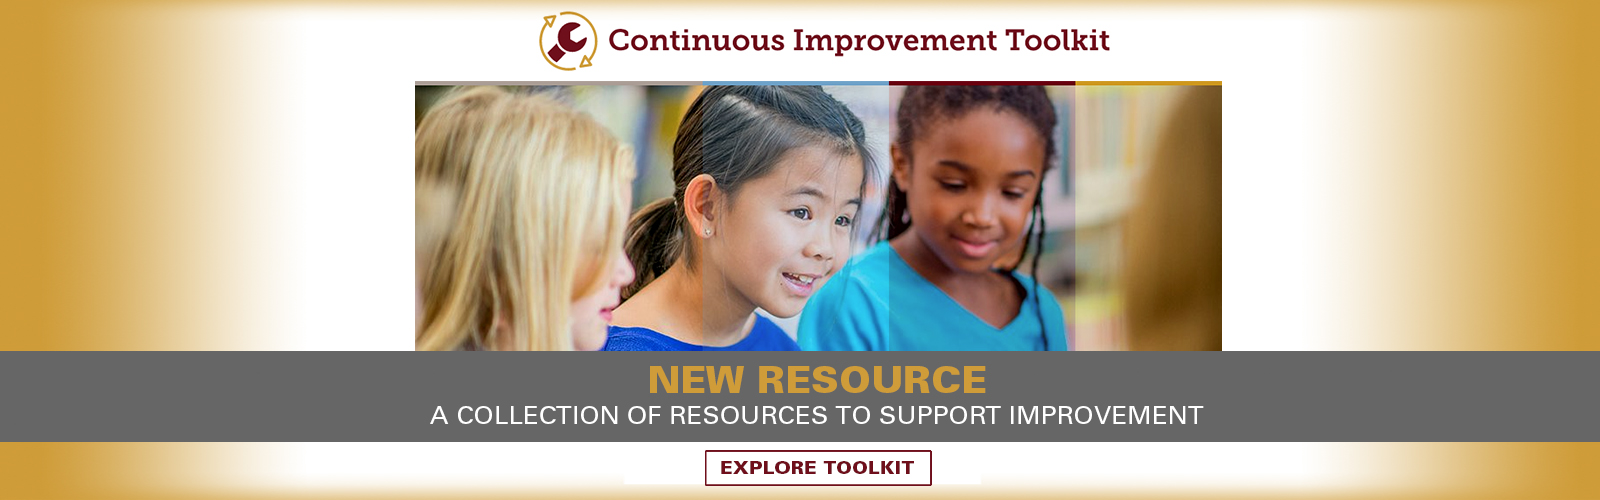 New Resource: Continuous Improvement Toolkit. A collection of resources to support improvement